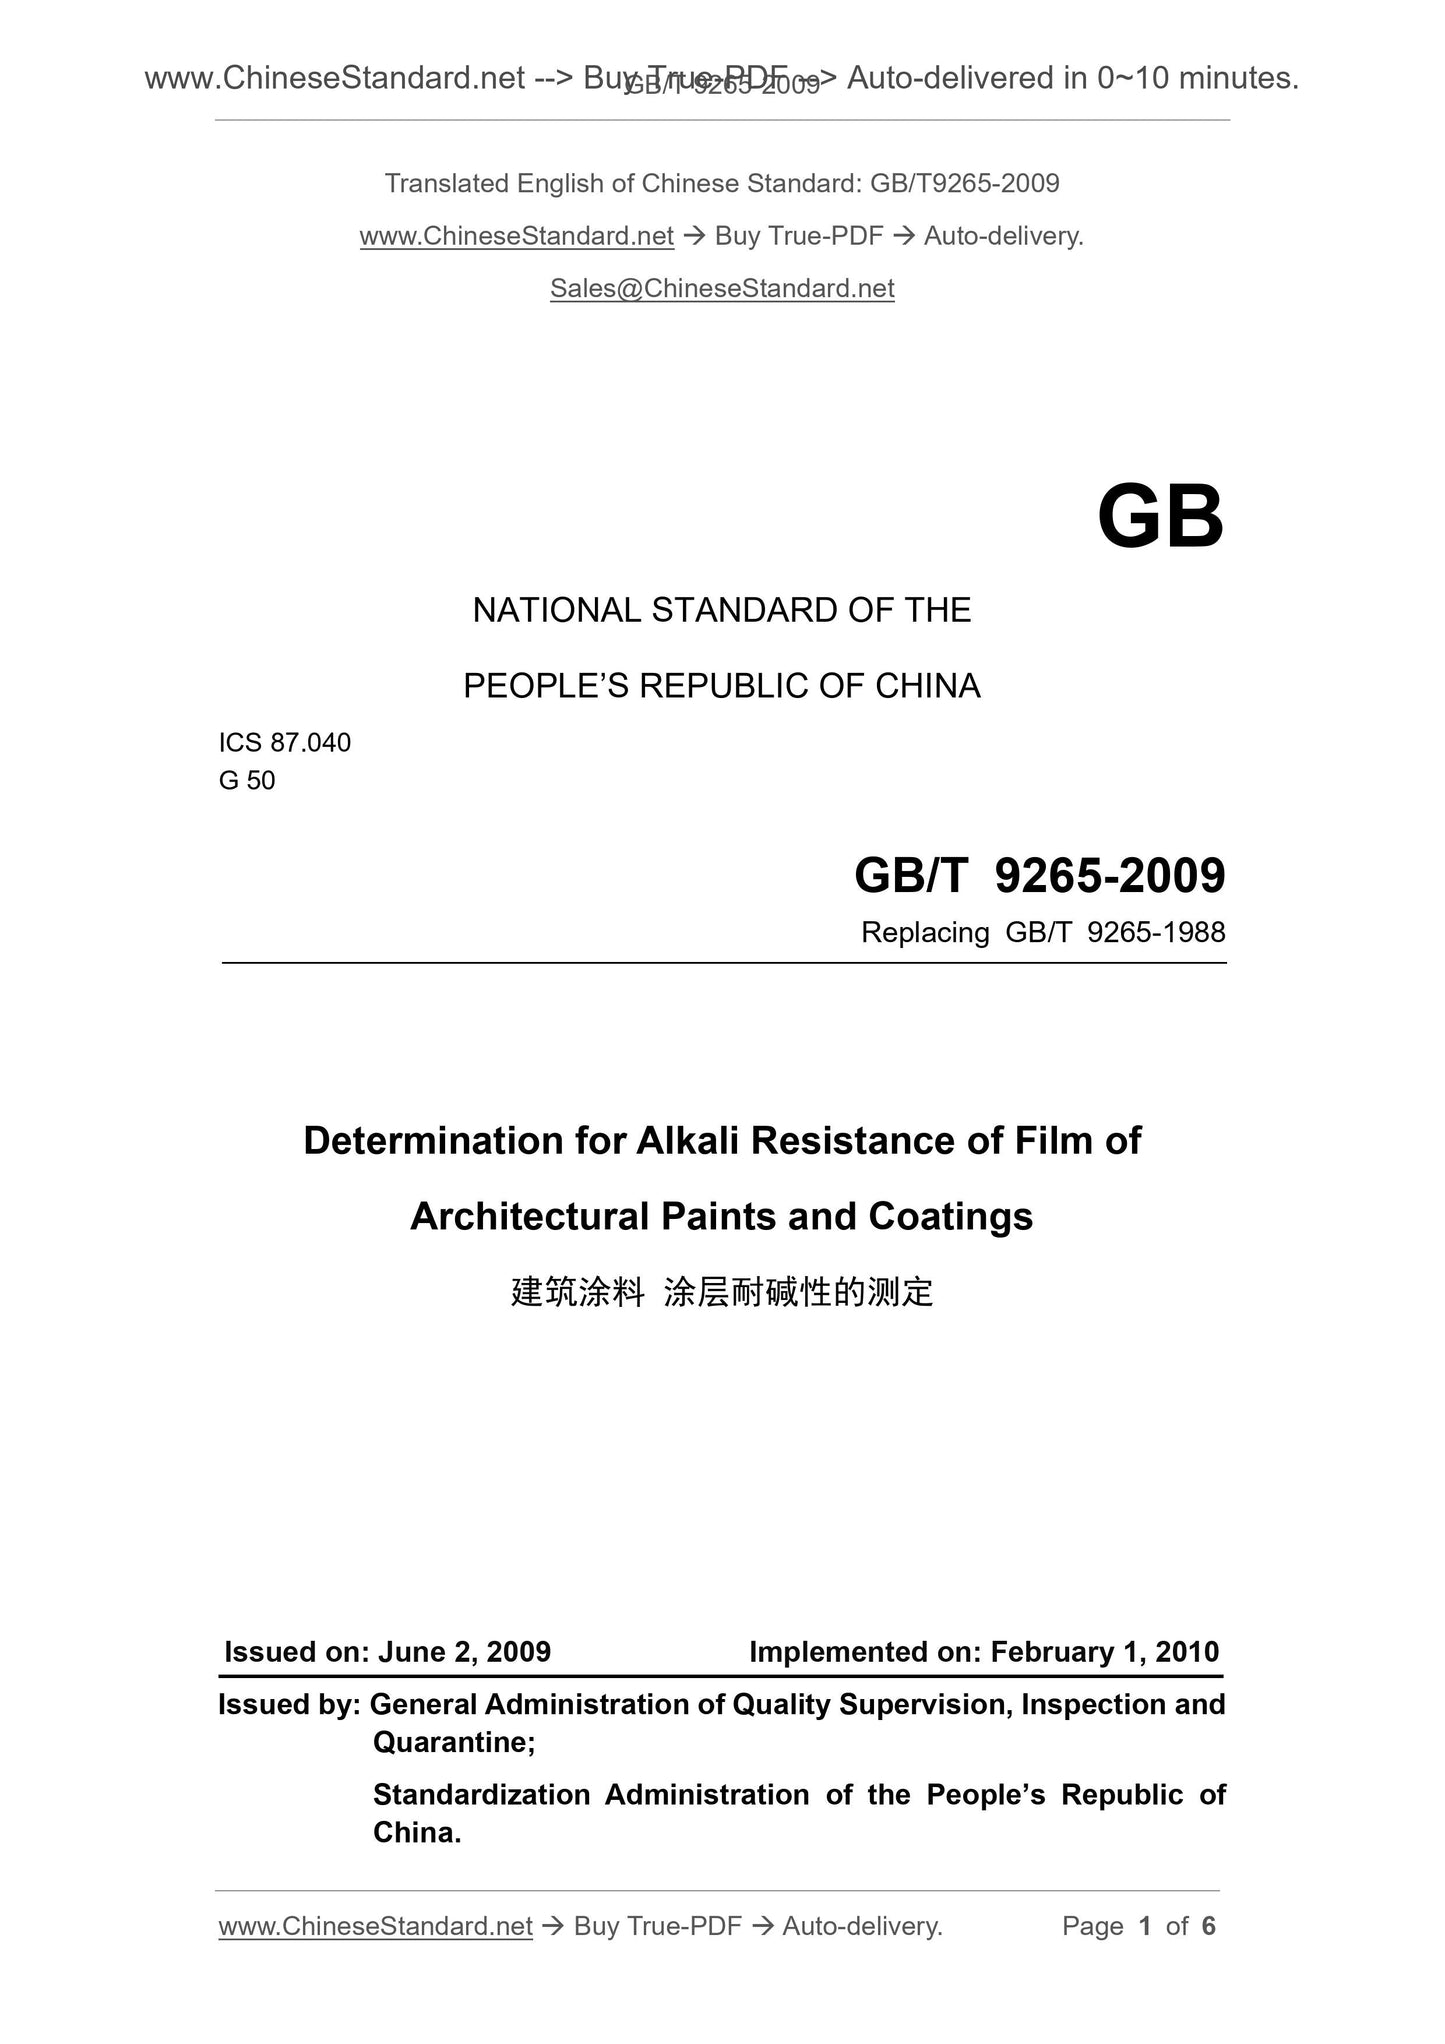 GB/T 9265-2009 Page 1